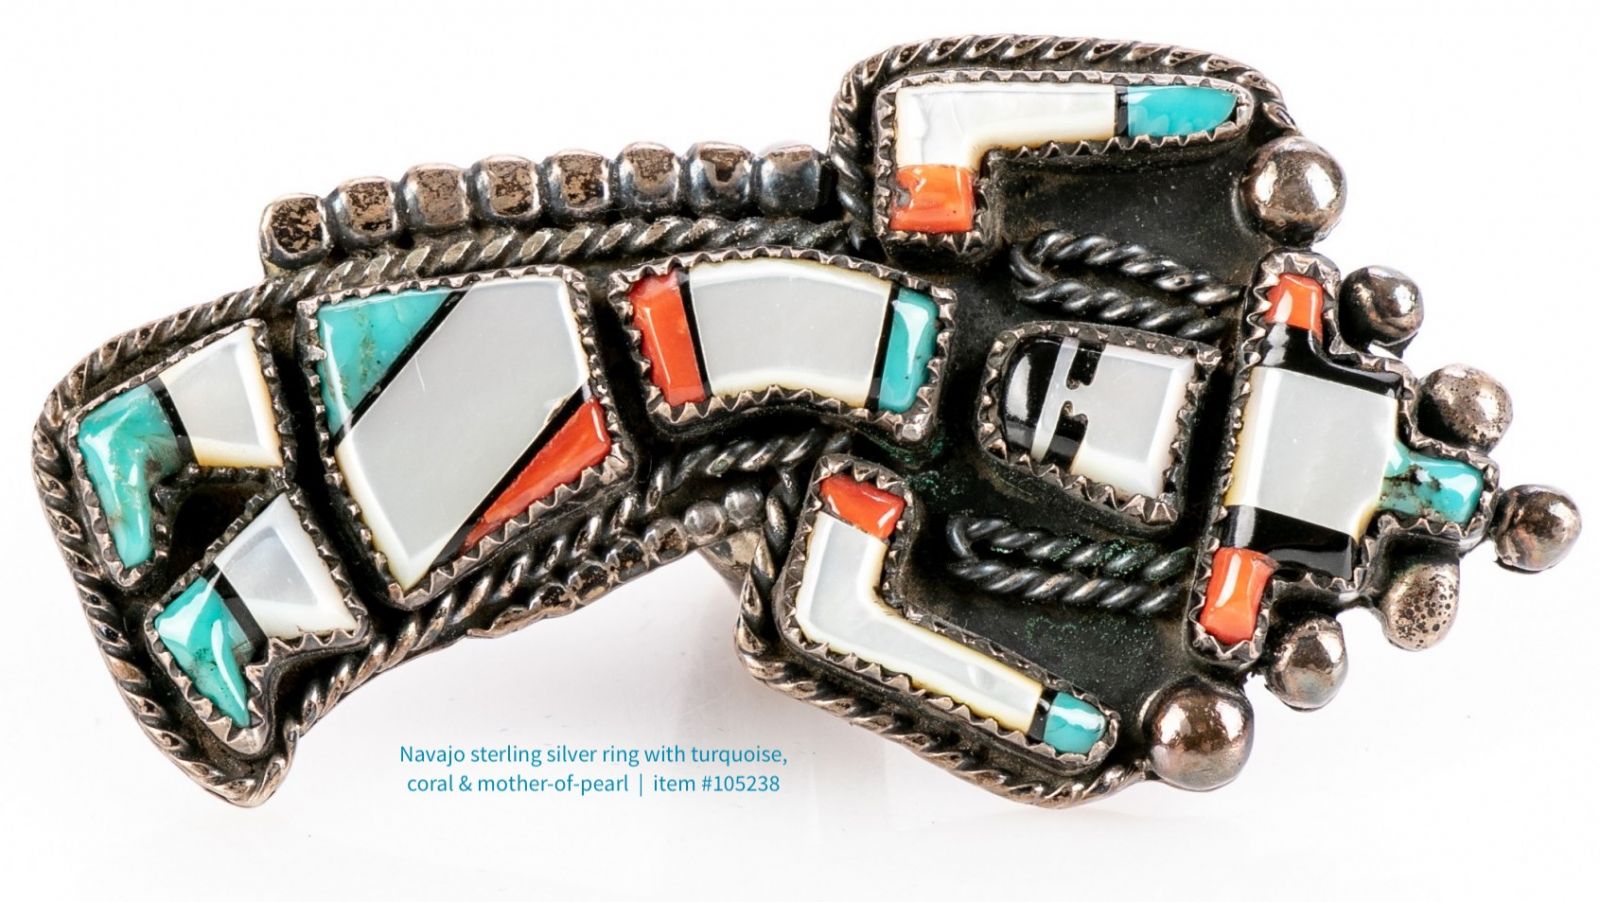 Use of natural materials including turquoise, coral, and mother-of-pearl are indicative of Native American jewelry style